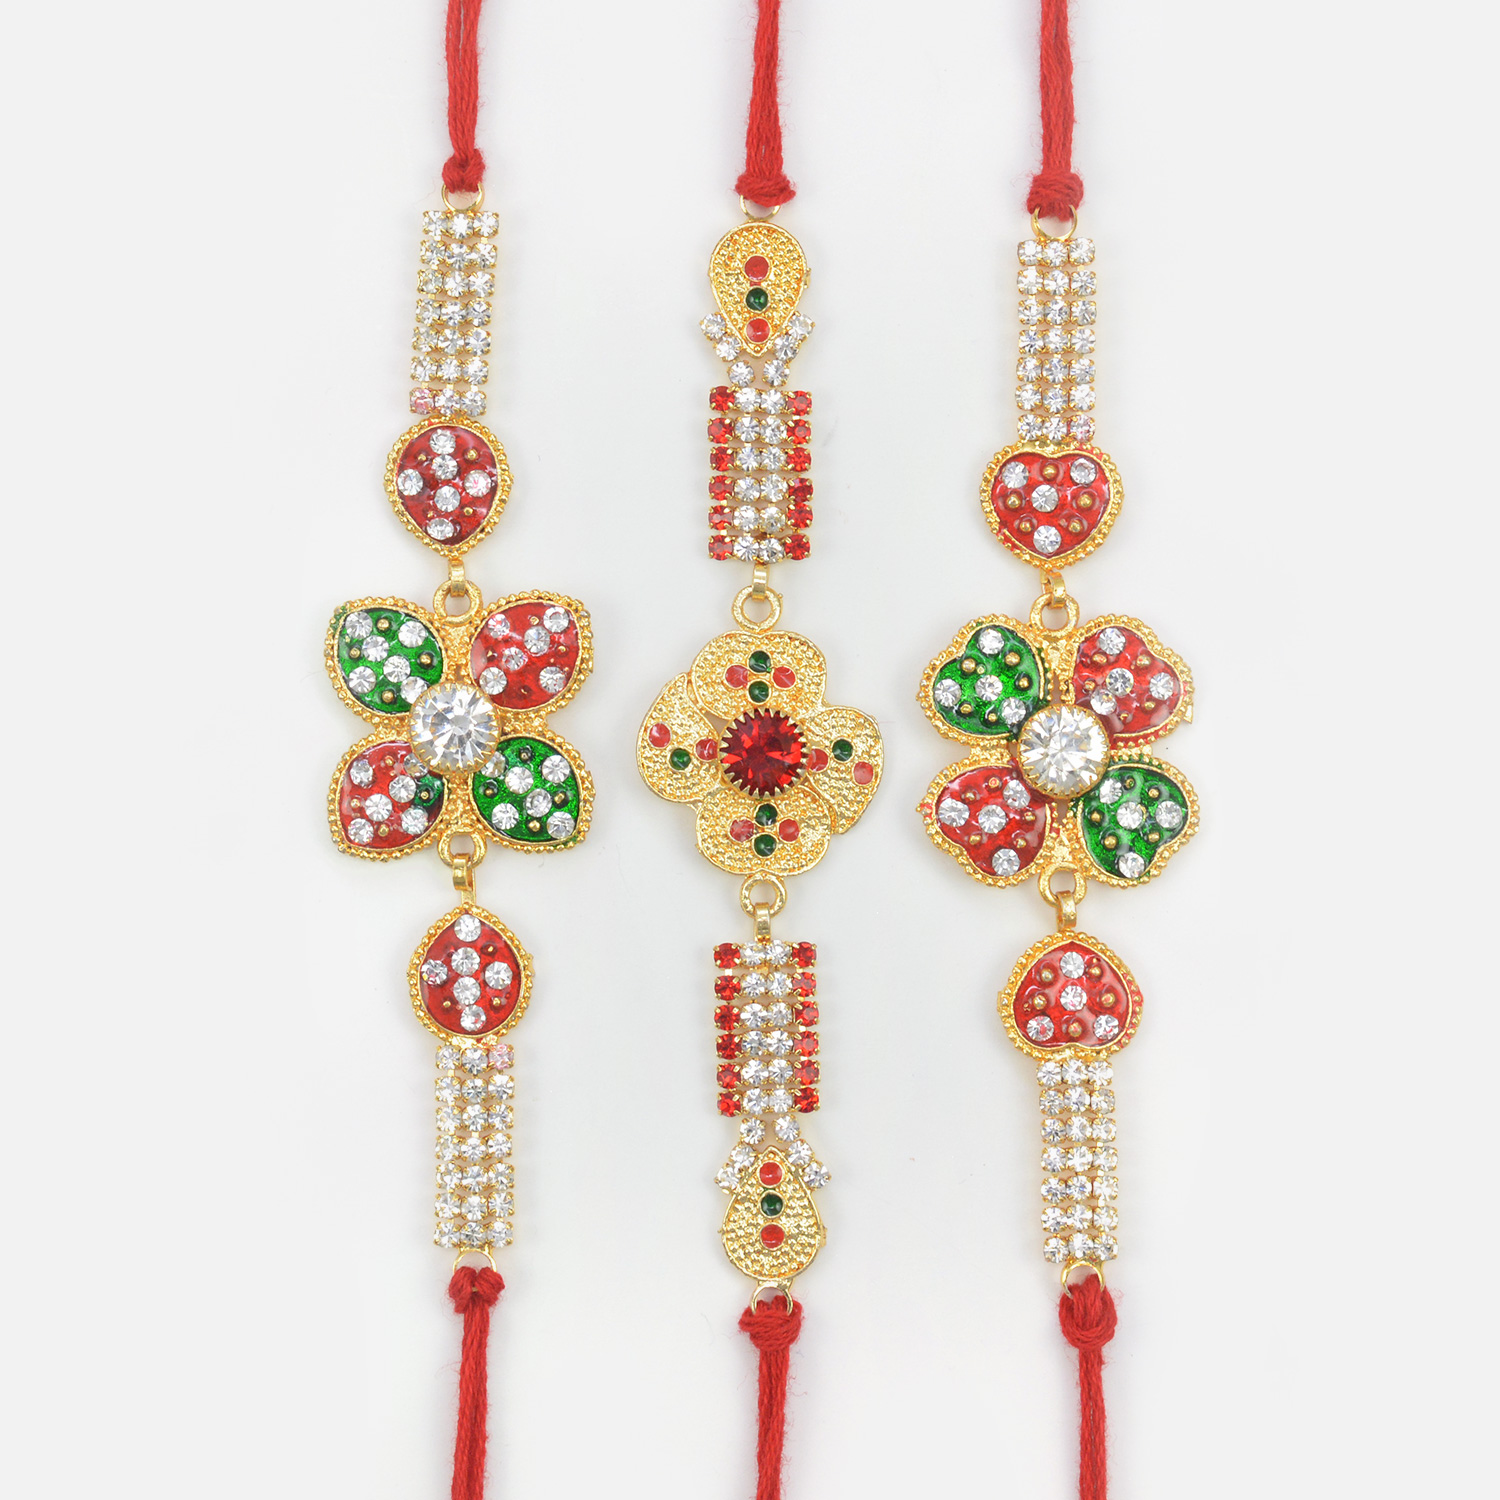 Meenakari Hand Colorful Work Flower Shape and Golden Color Marvelous Jewel Rakhis for 3 Brothers